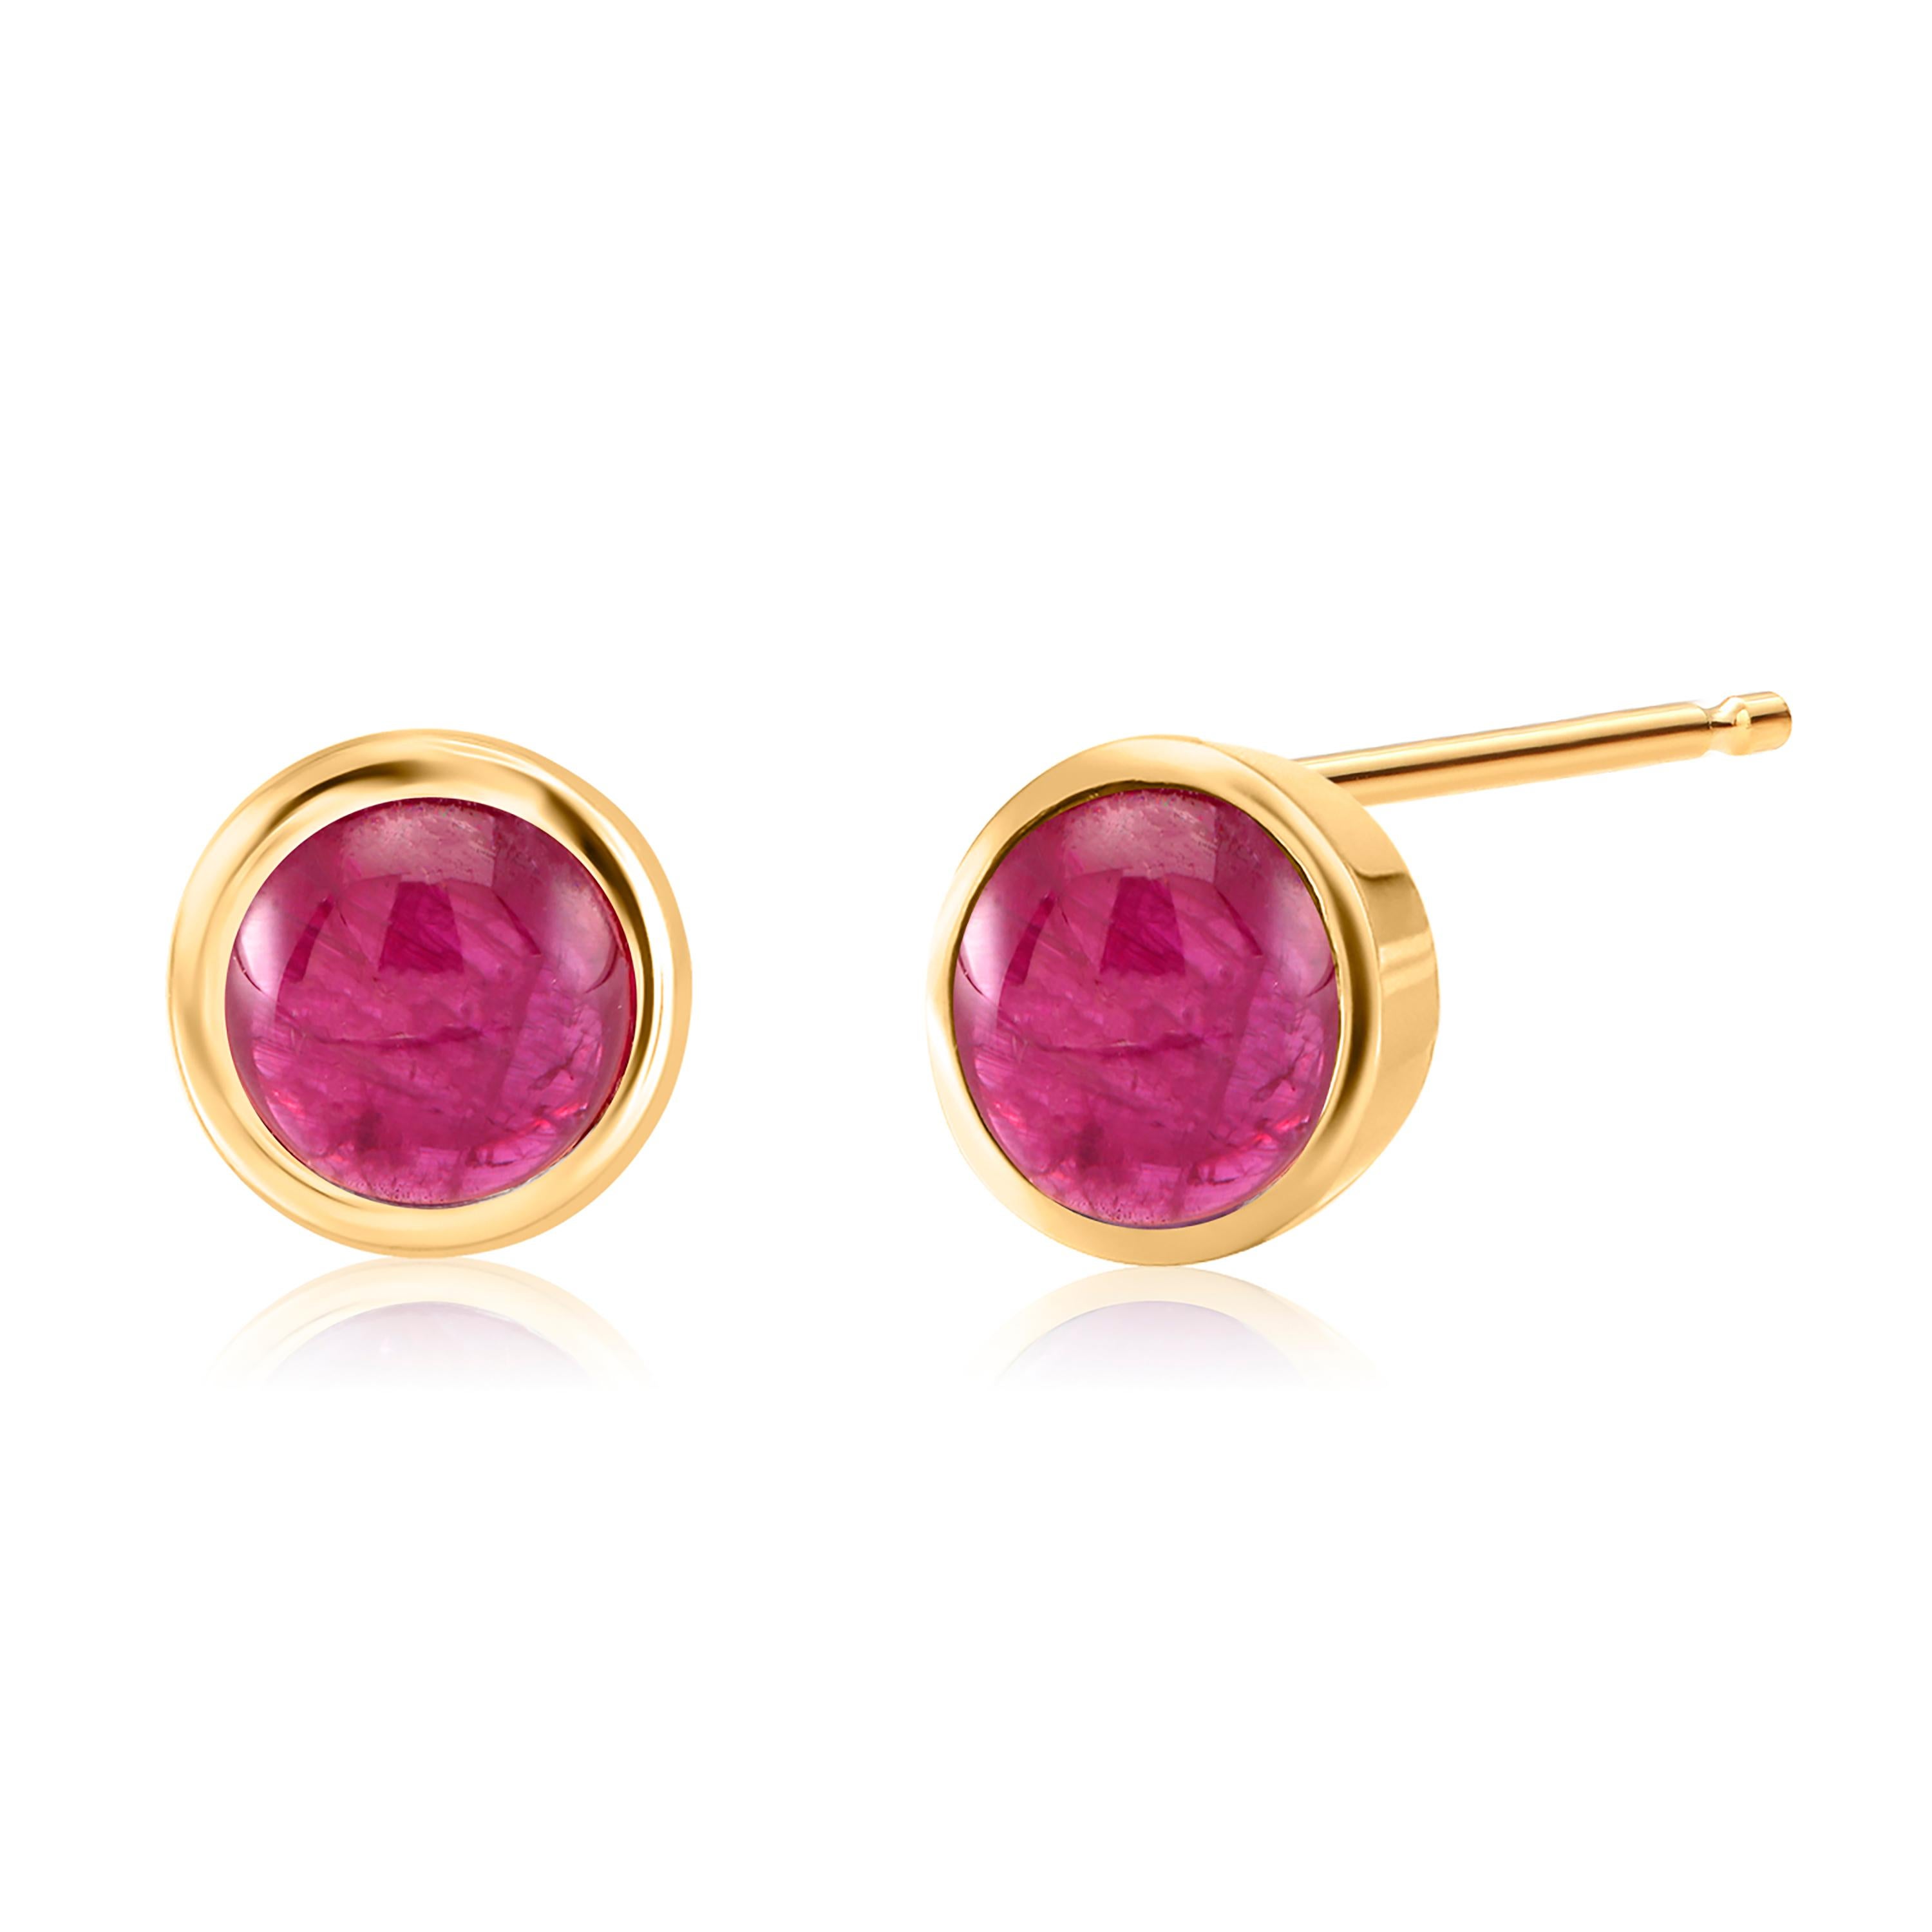 Matched Cabochon Ruby 1.25 Carat Bezel Set Yellow Gold 0.25 Inch Stud Earrings 1